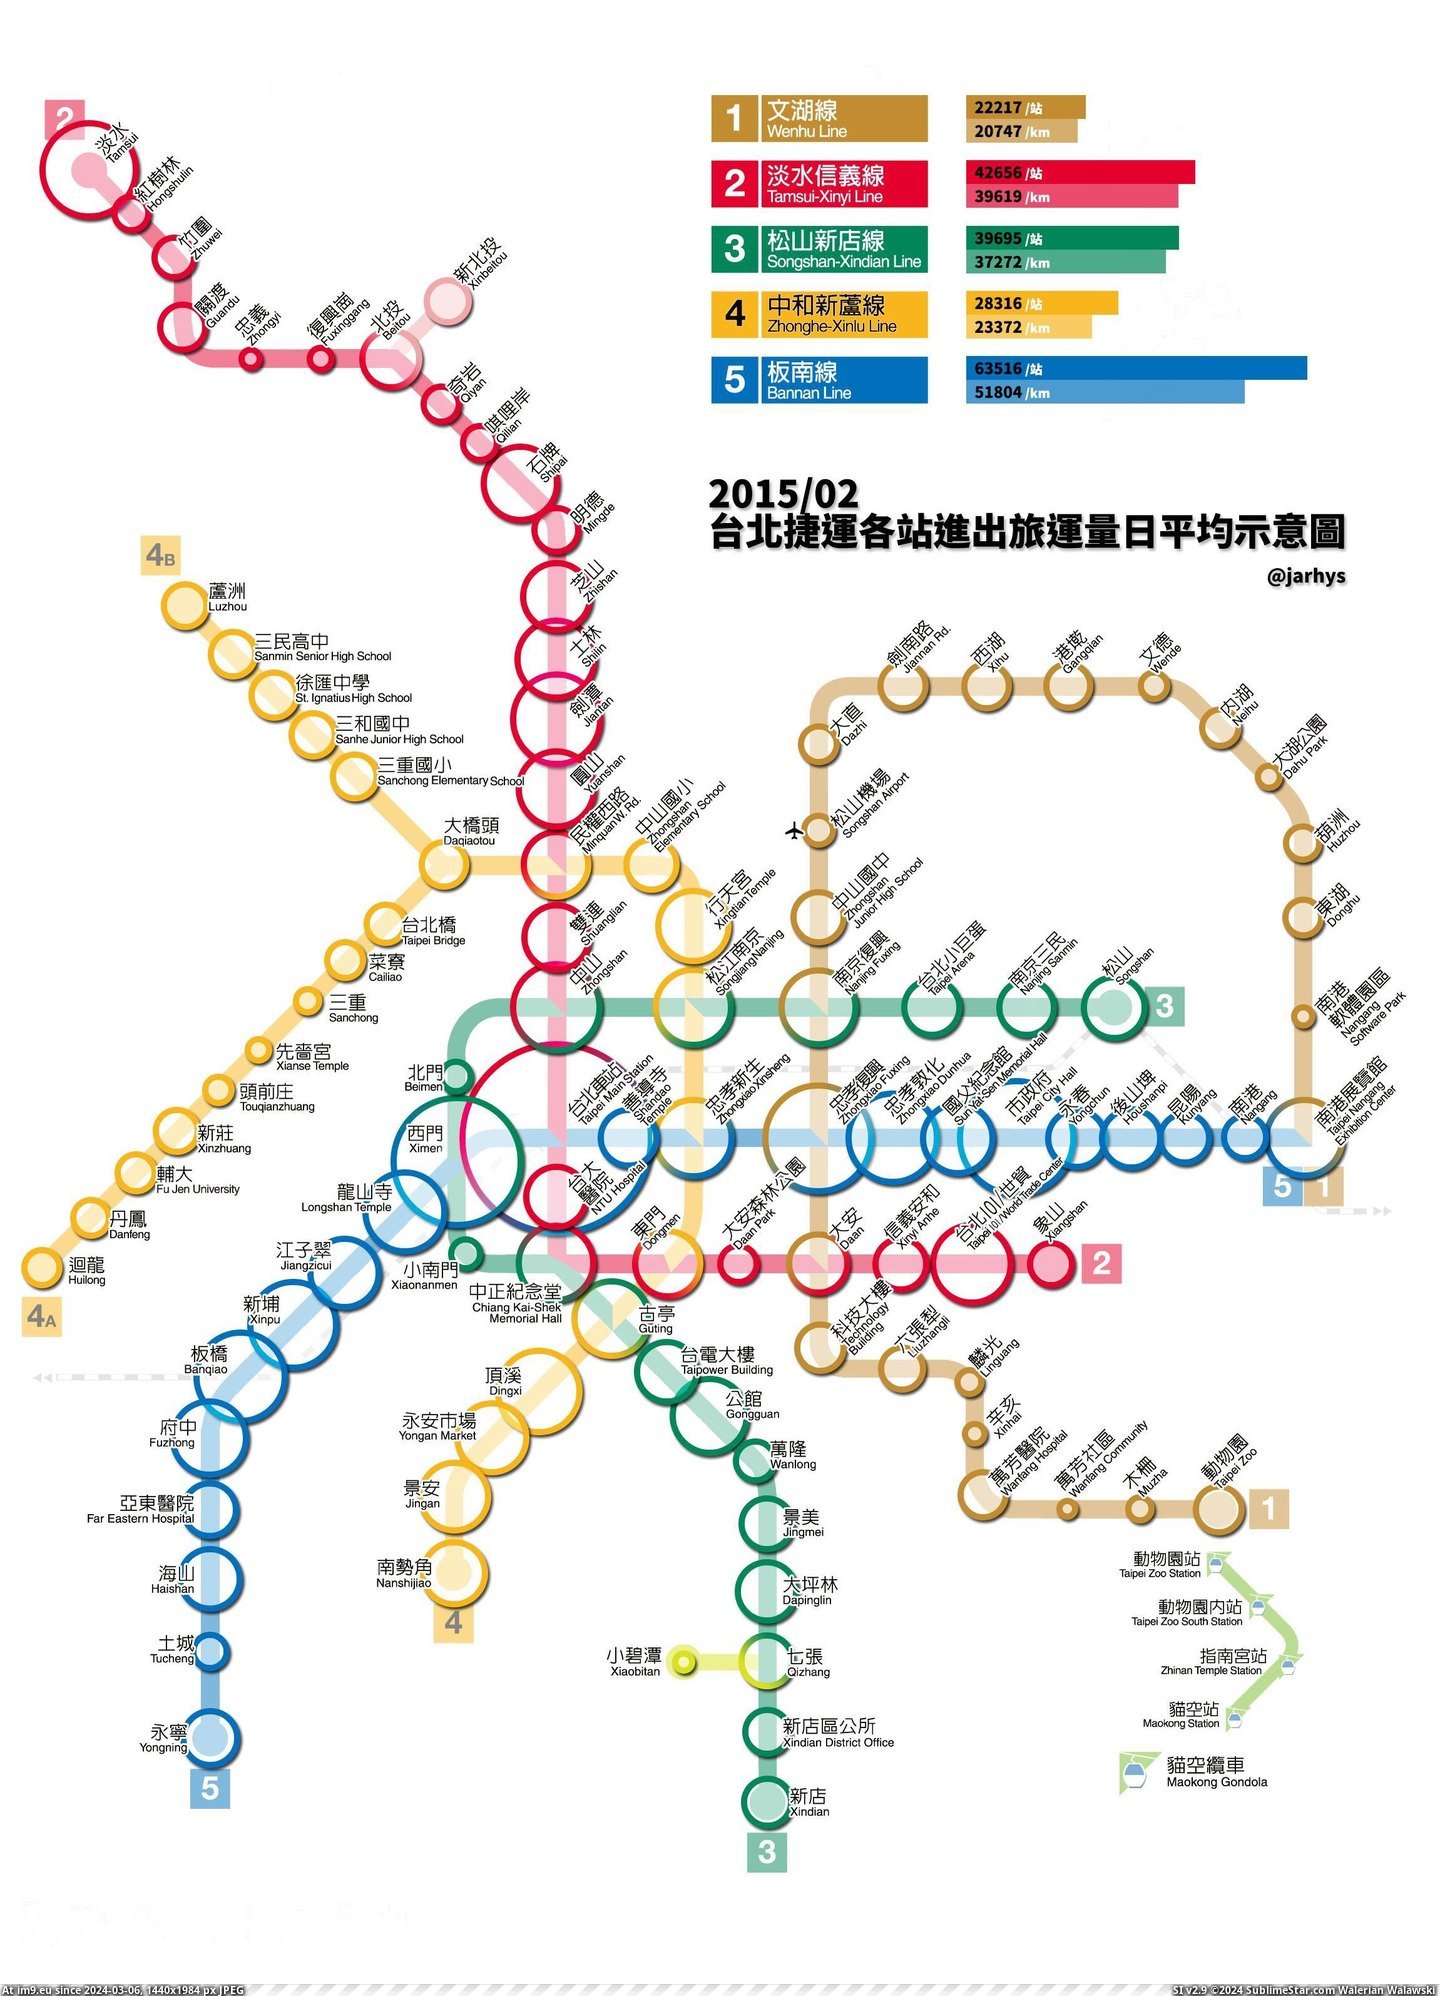 #Size #Relative #Gates #Numbers #Entering #Terms #Taipei #Passenger #Taiwan #Feb #Stations [Mapporn] Relative size of all Taipei MRT stations, in terms of passenger numbers entering and exiting gates, Feb 2015 [taiwan]  Pic. (Изображение из альбом My r/MAPS favs))